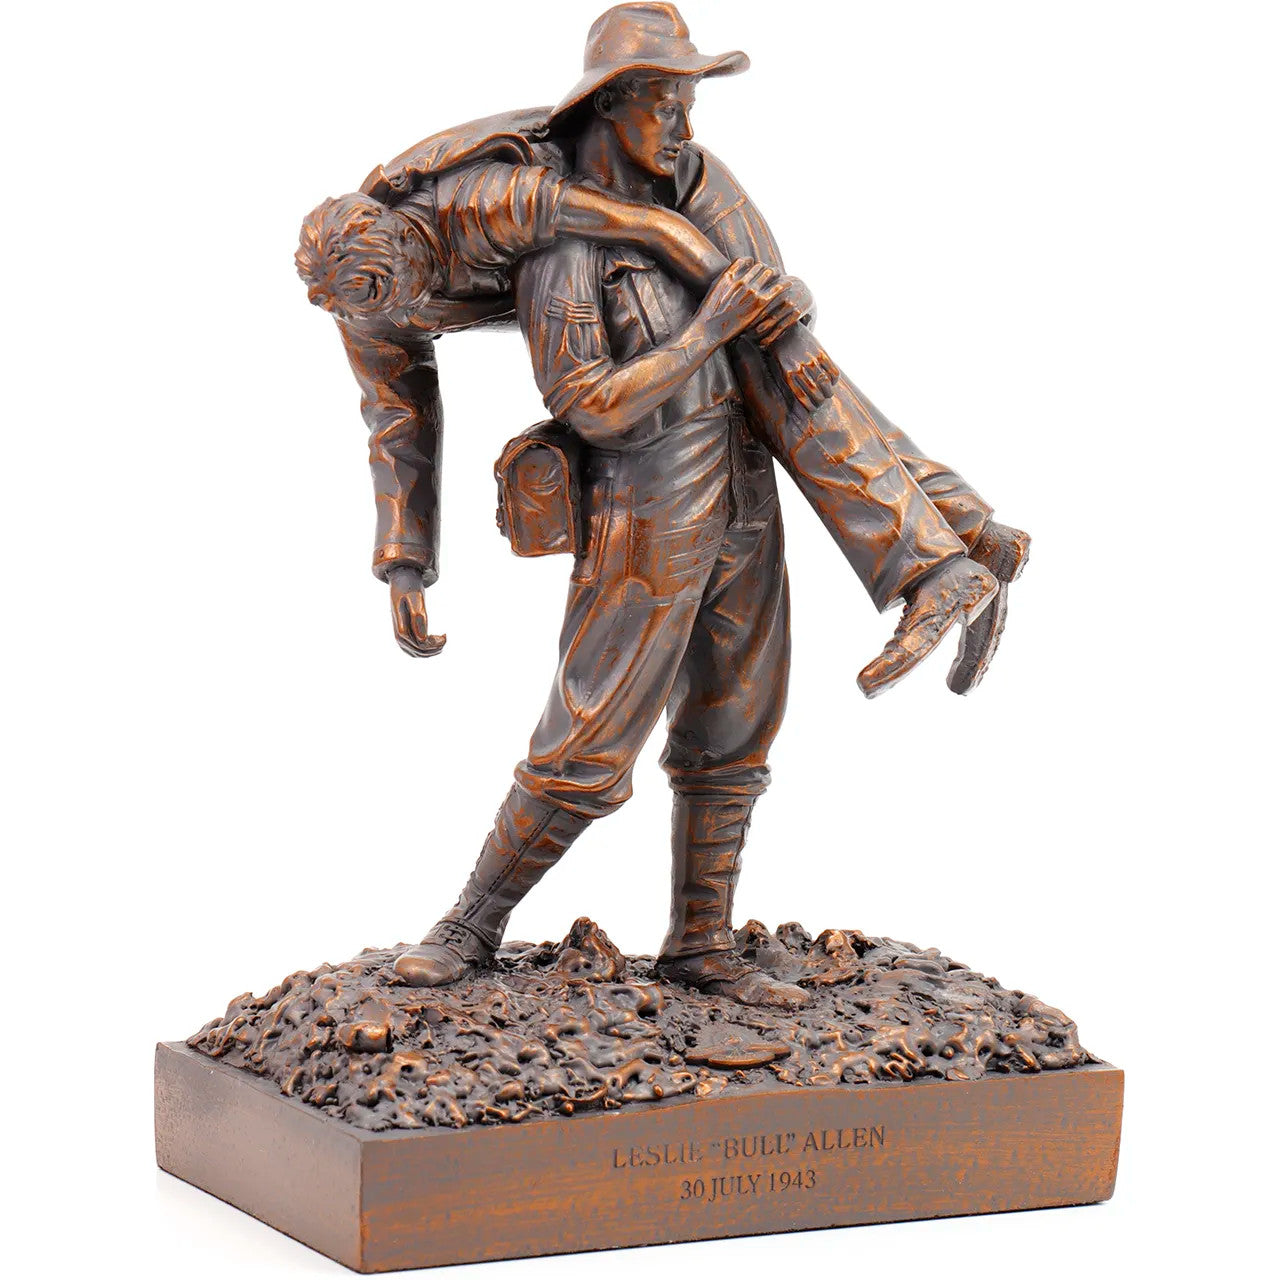 Introducing the Leslie Bull Allen Spirit of Mateship Figurine, a remarkable tribute to an extraordinary act of valor and camaraderie. Crafted with precision from cold cast bronze, this figurine immortalizes a defining moment in history. www.defenceqstore.com.au